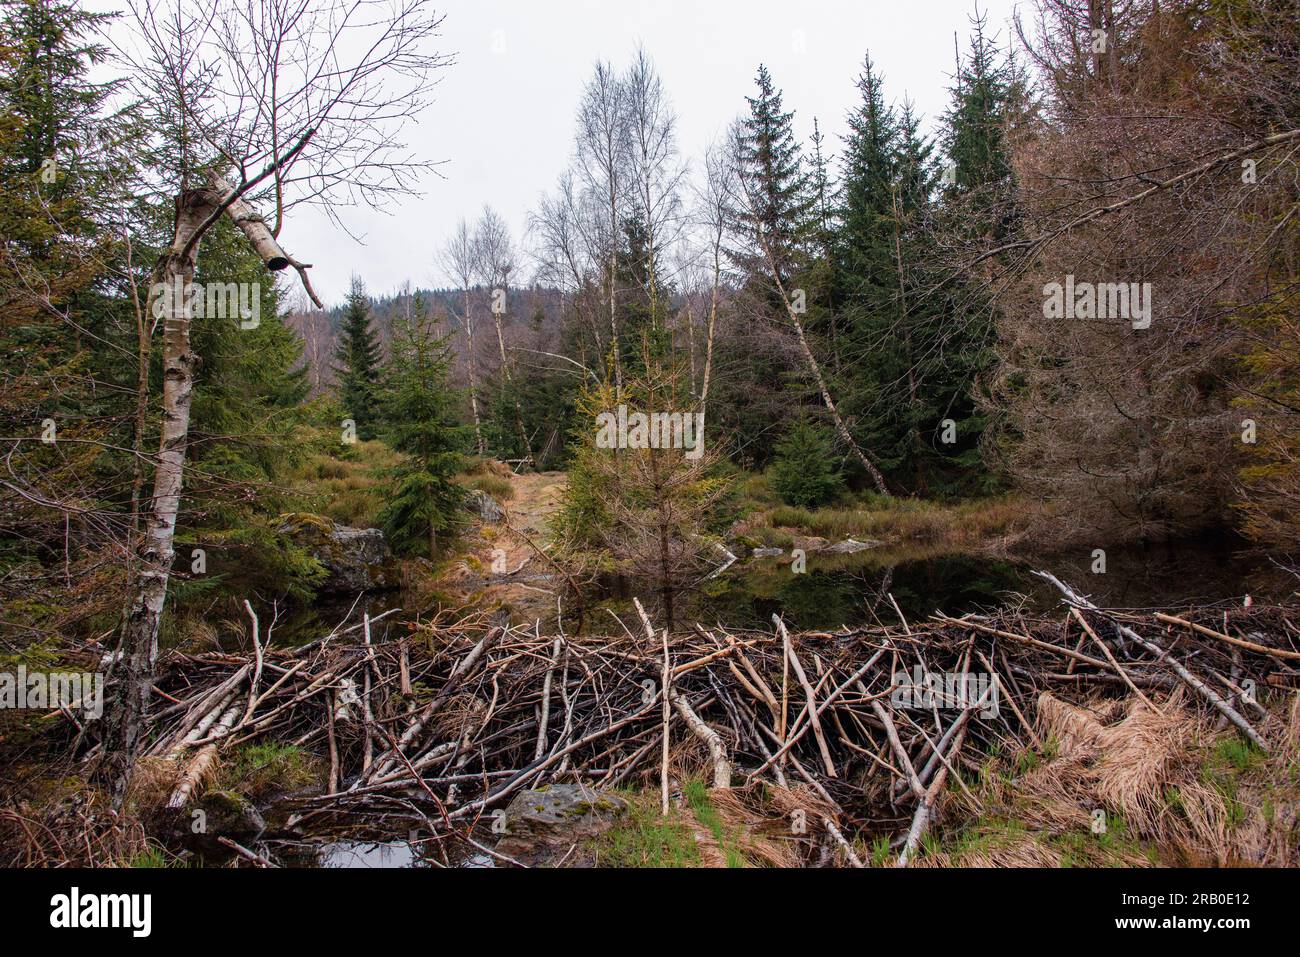 Beaver dam on the Northern slopes of Mount Rachel at a height of 1000 metres ASL. Beavers have come back in the Bavarian Forest since being protected Stock Photo